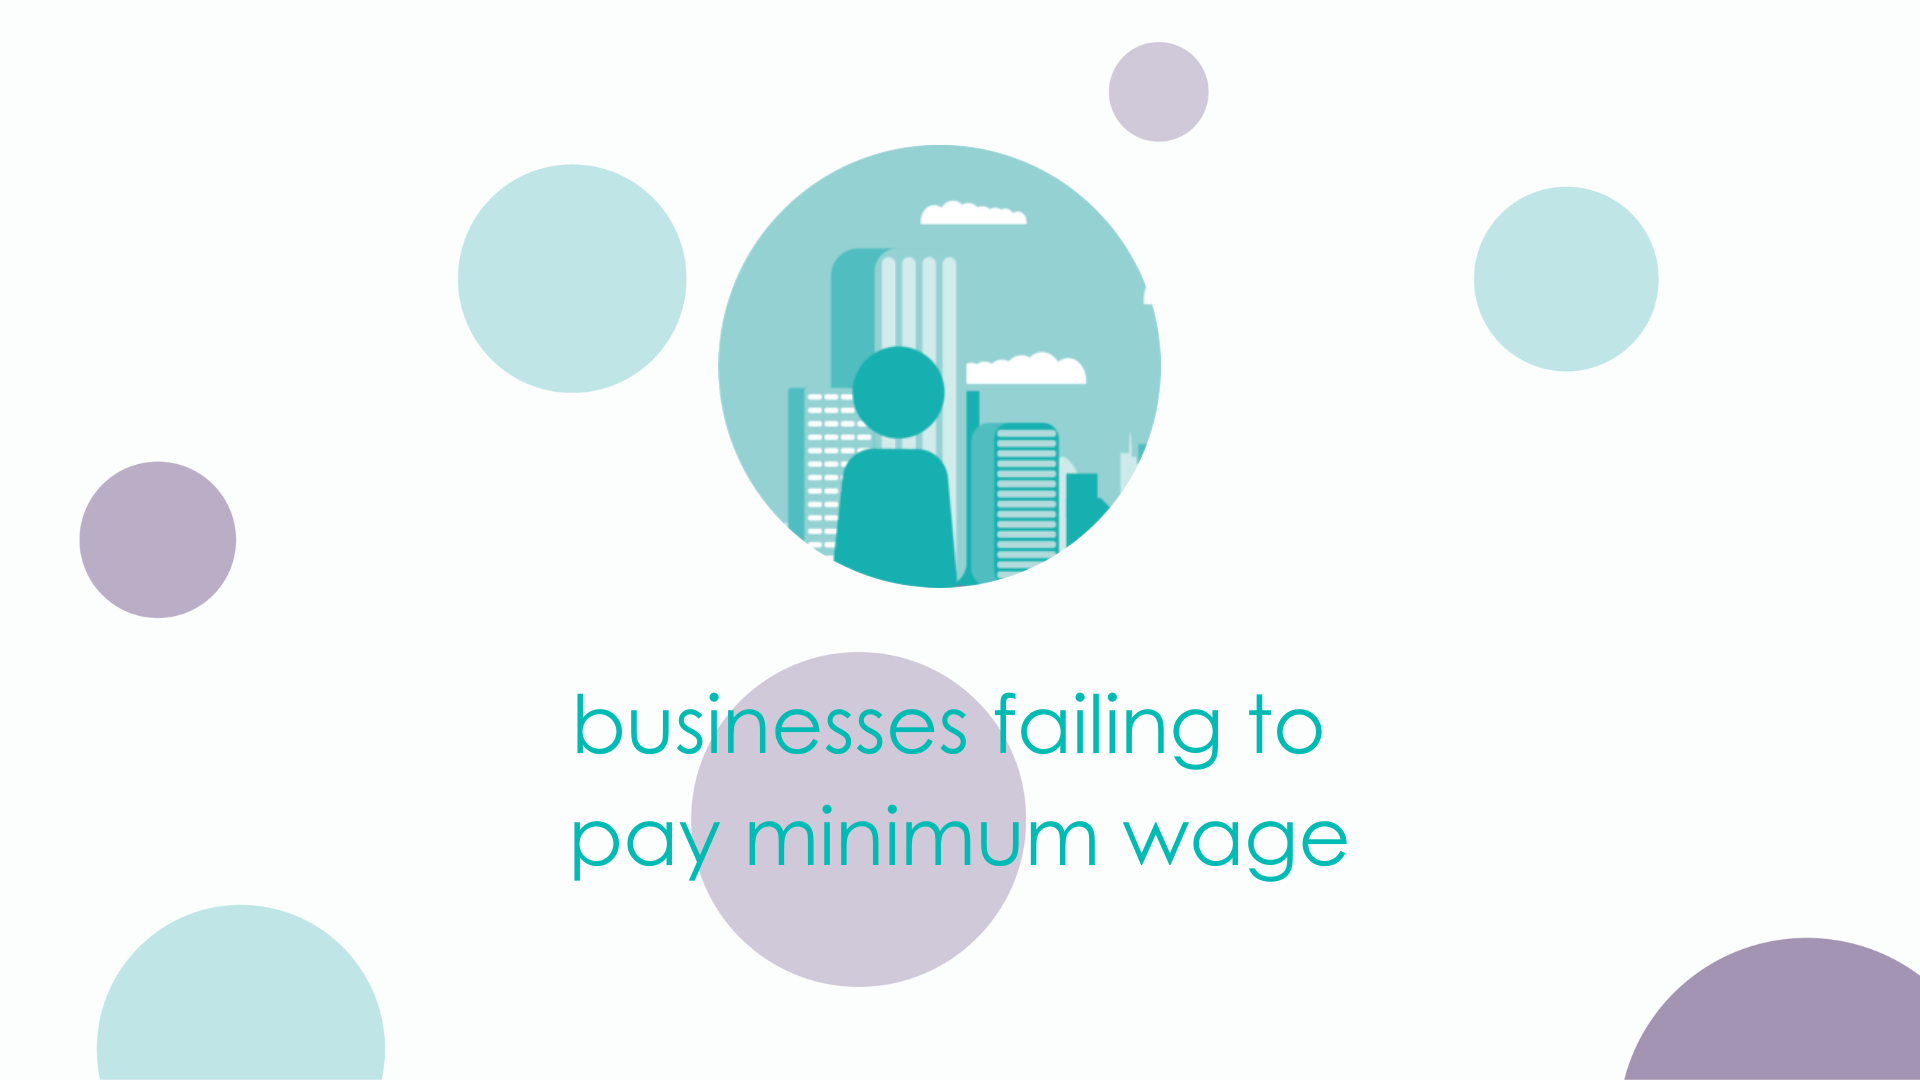 Businesses failing to pay minimum wage